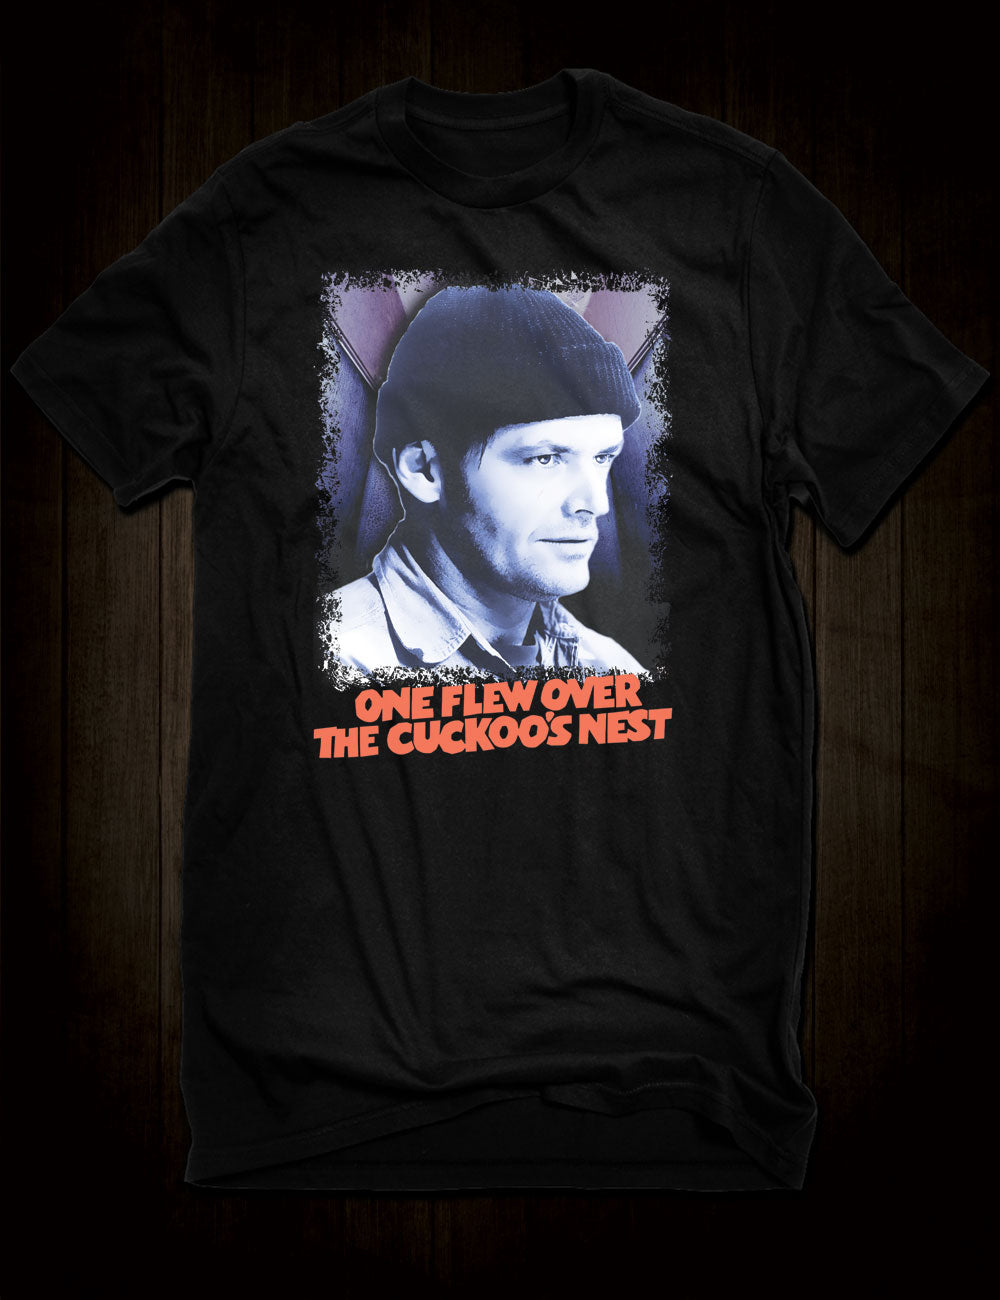 Jack Nicholson One Flew Over The Cuckoo's Nest T-Shirt Ken Kesey